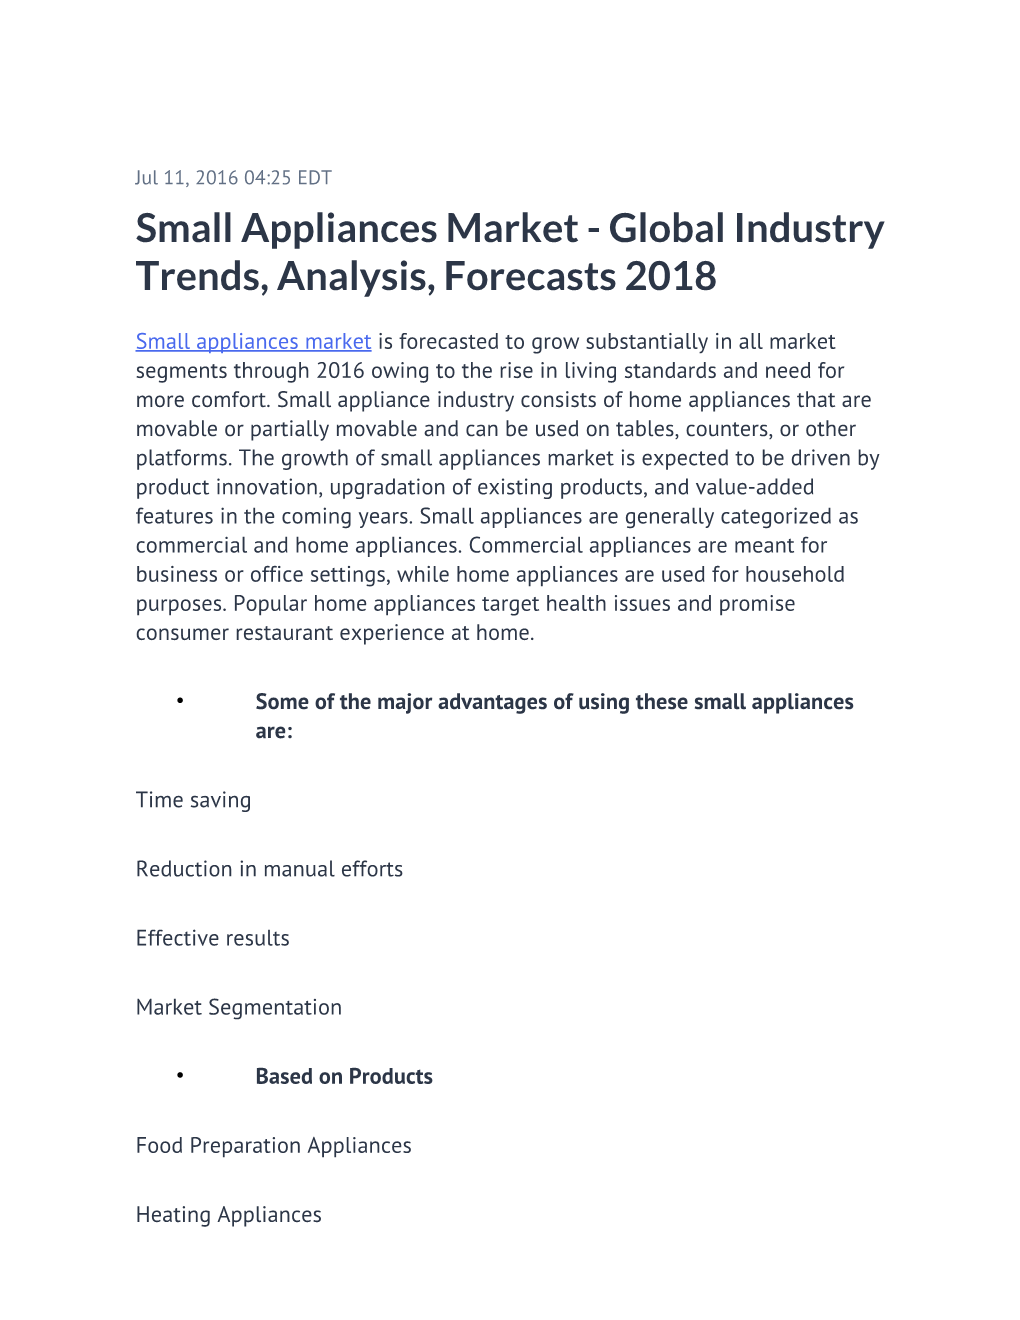 Small Appliances Market - Global Industry Trends, Analysis, Forecasts 2018